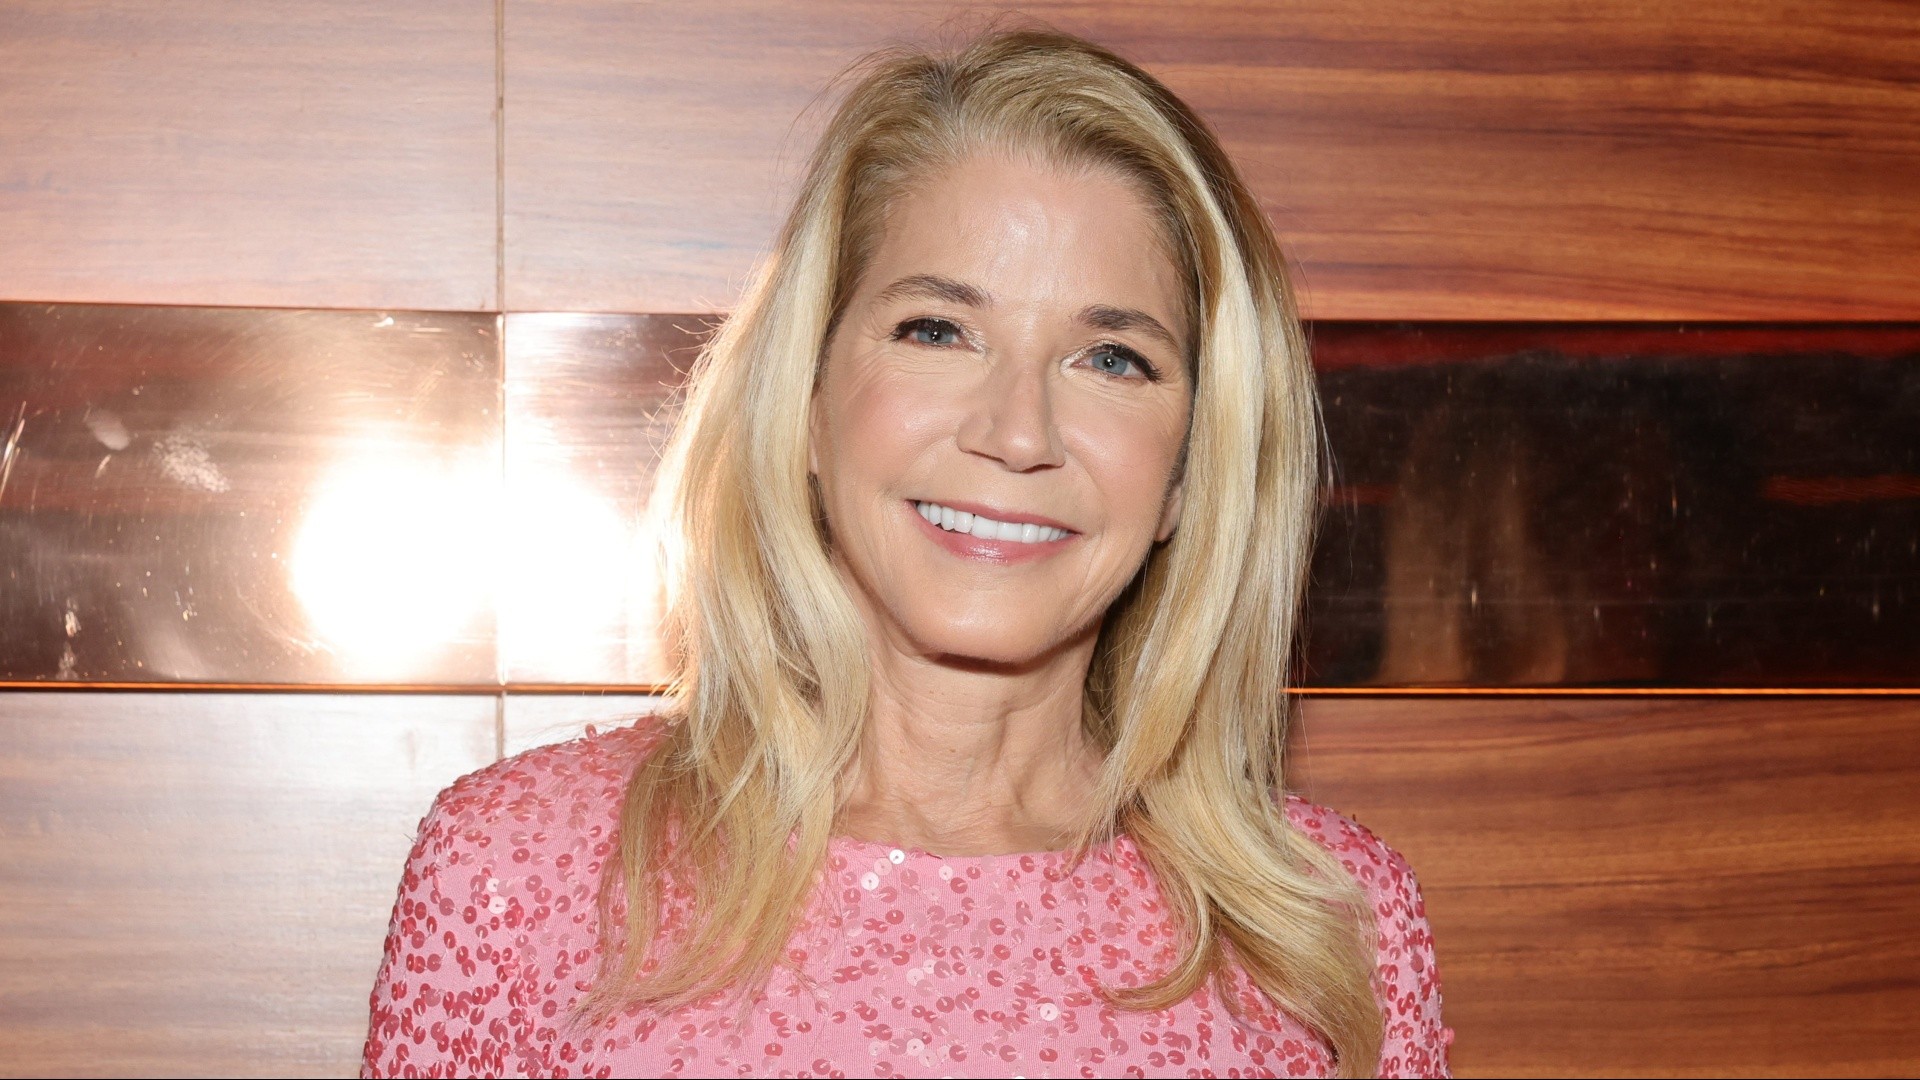 Candace Bushnell announces dating series for women 50+